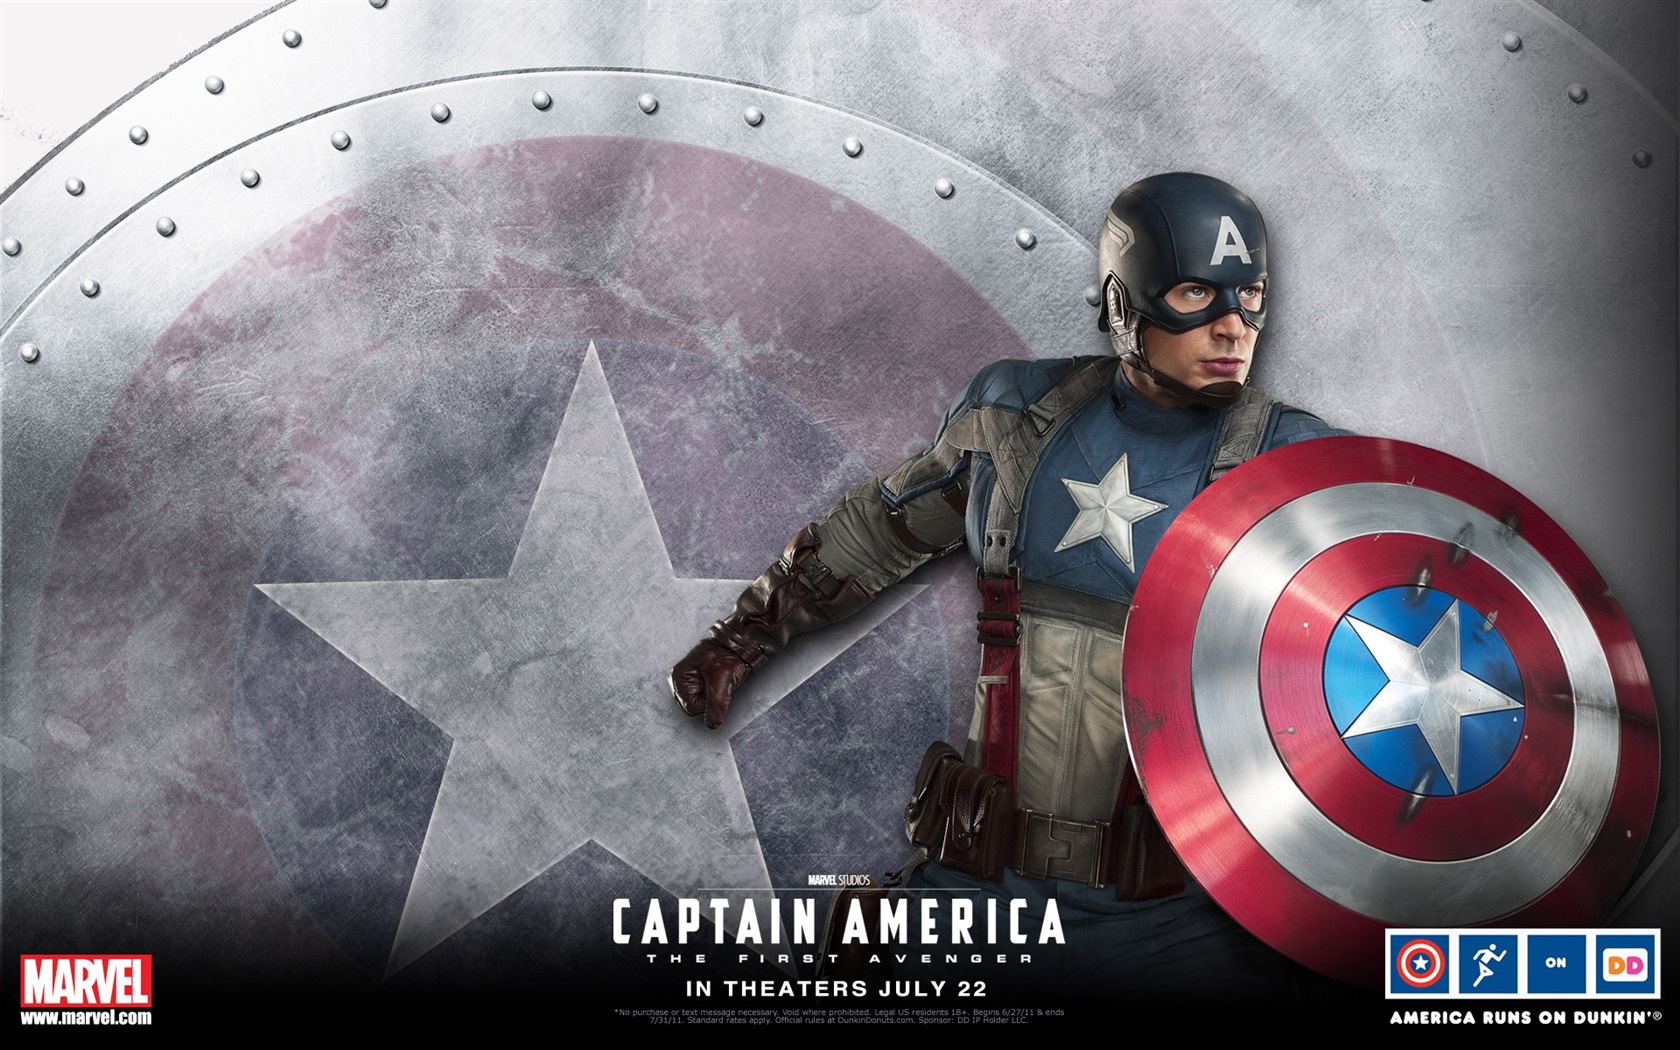 Captain America: The First Avenger wallpapers HD #6 - 1680x1050